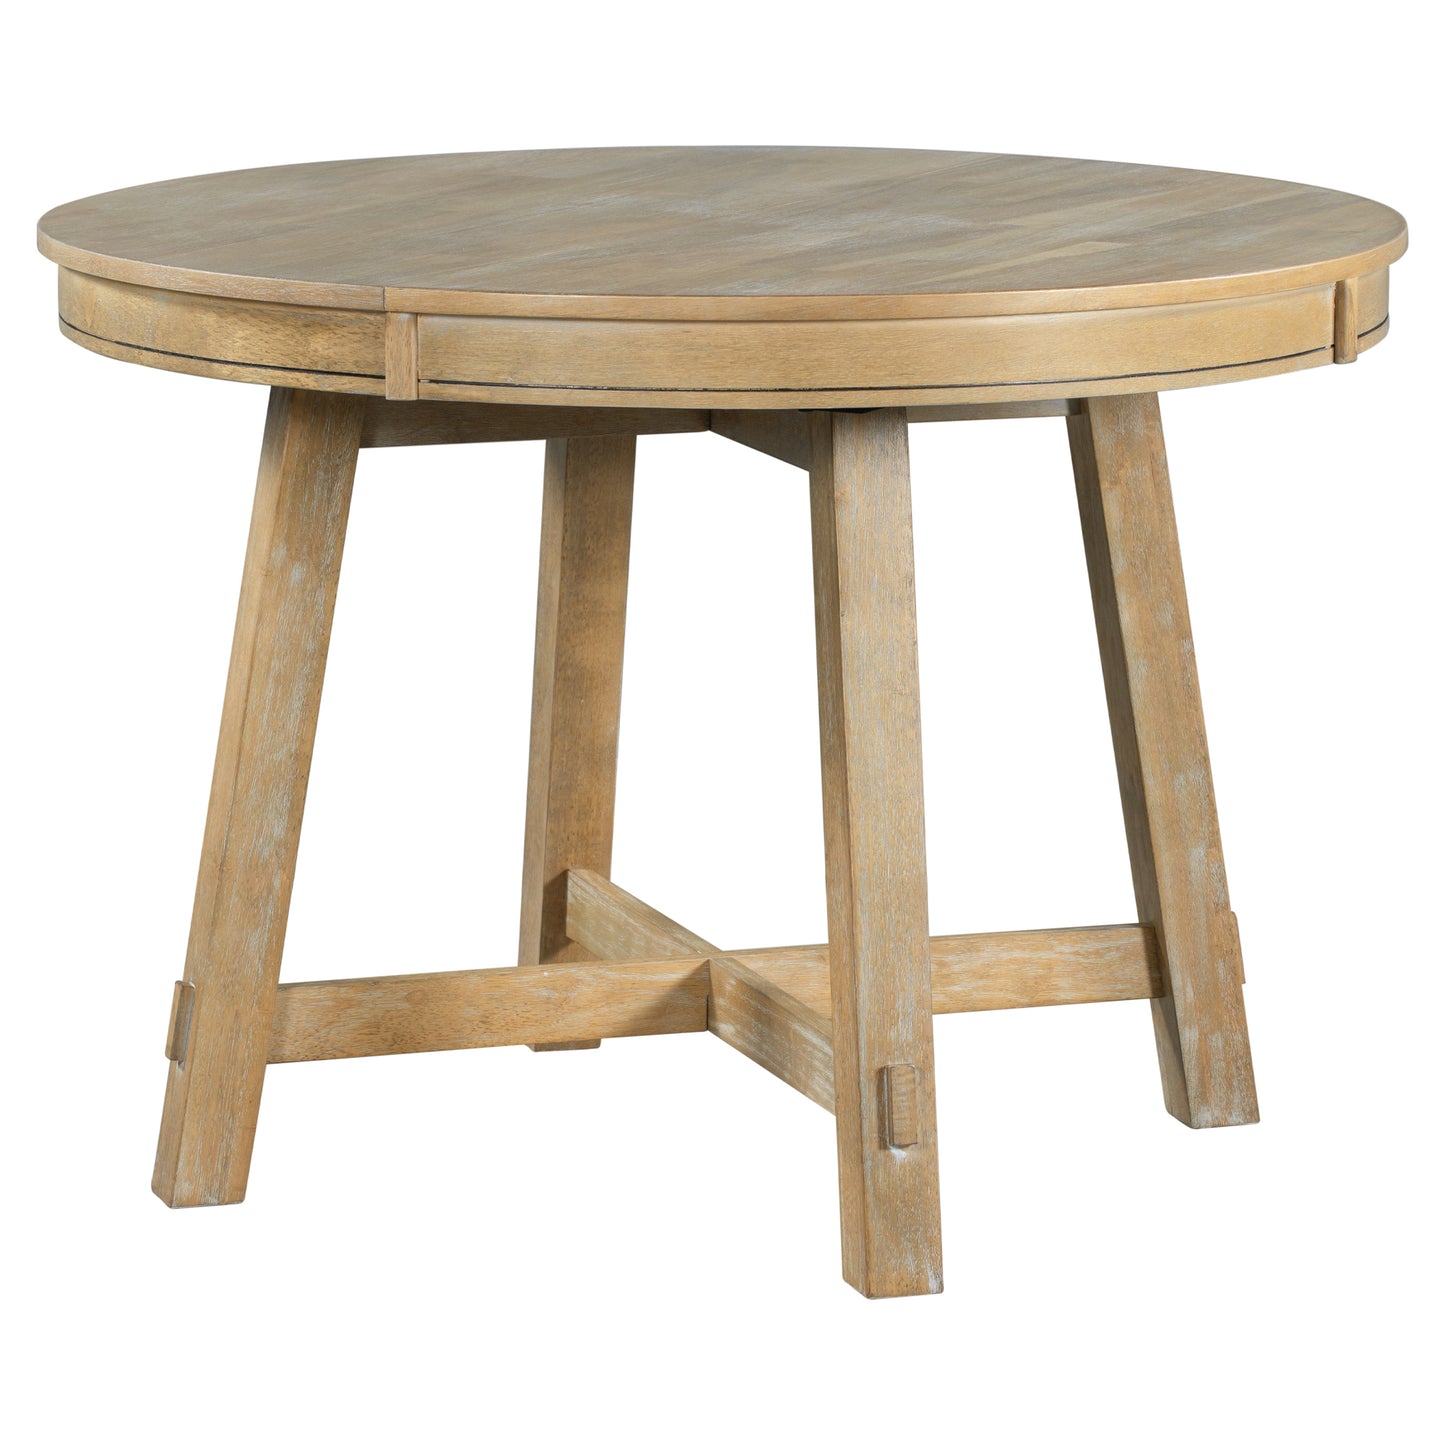 Farmhouse Round Extendable Dining Table with 16" Leaf, Natural Wood Wash